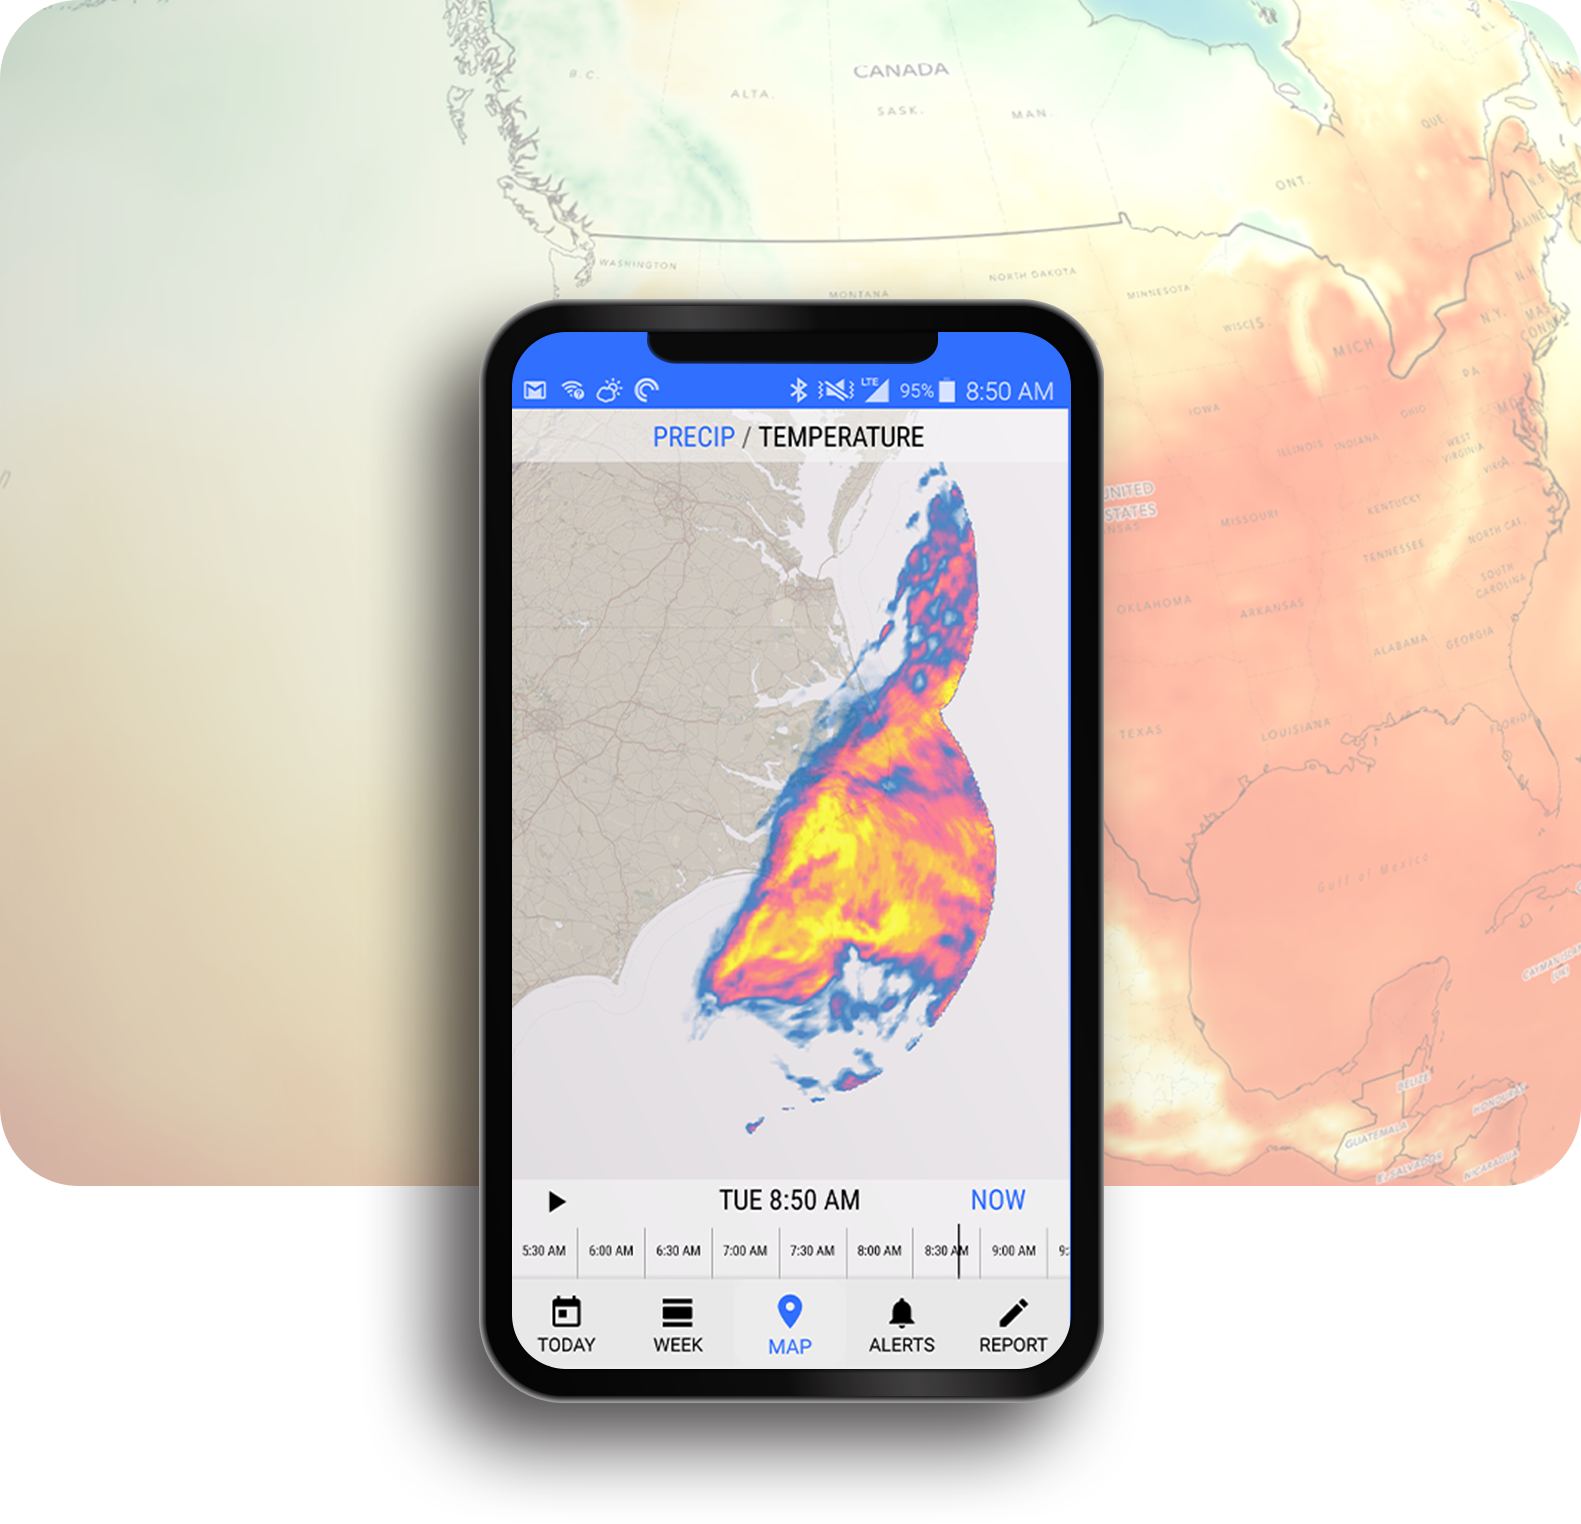 Composite image of weather app created for Dark Sky. Images are US maps overlain by weather patterns shown in red, orange, yellow, pink, and blue. Top image sits within the frame of a smartphone.